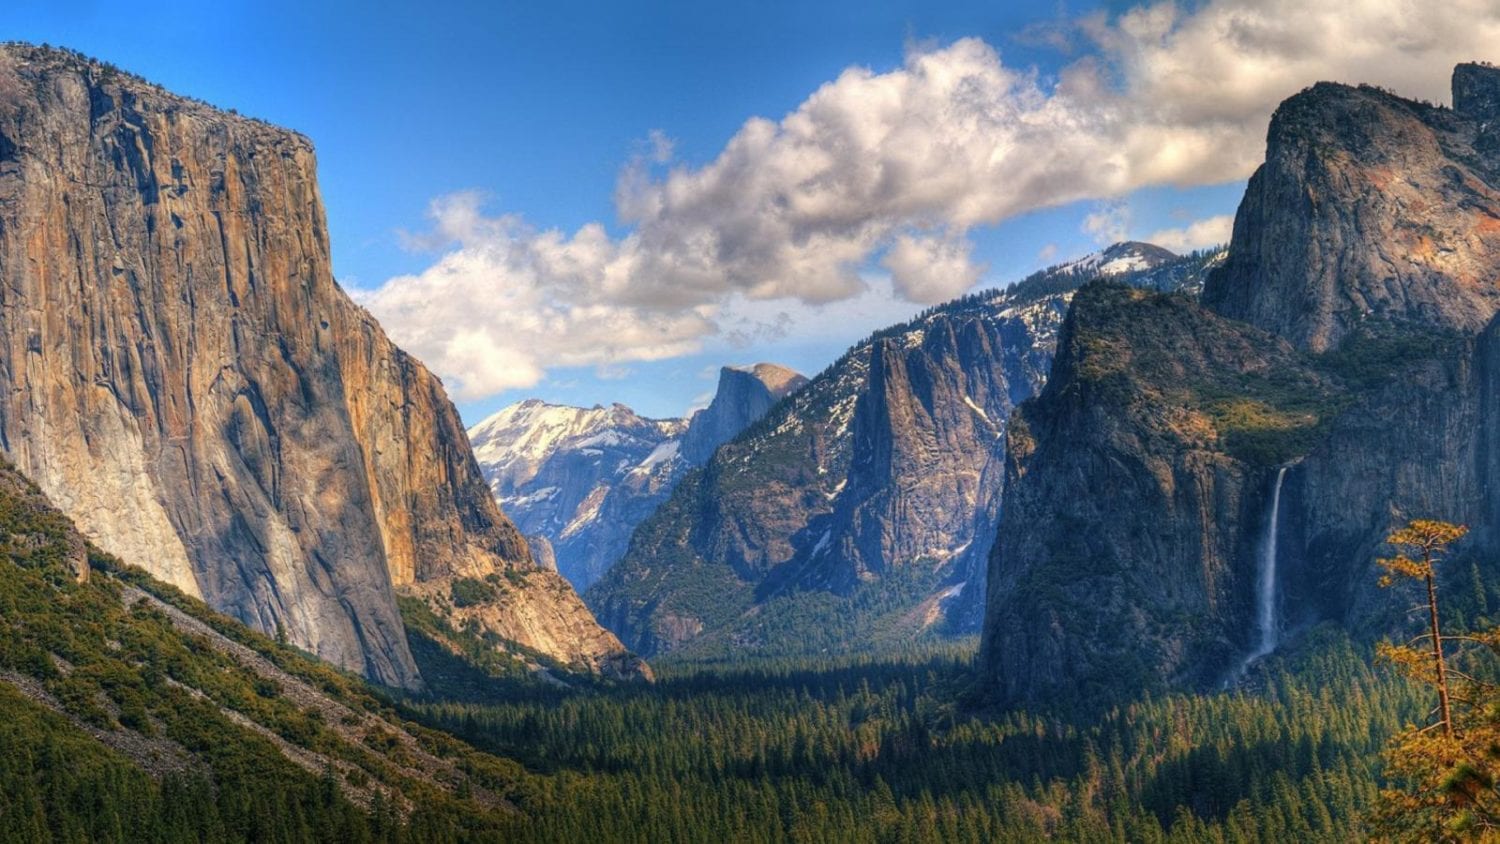 Adventure time: Head west to study the Ecology of the National Parks this summer